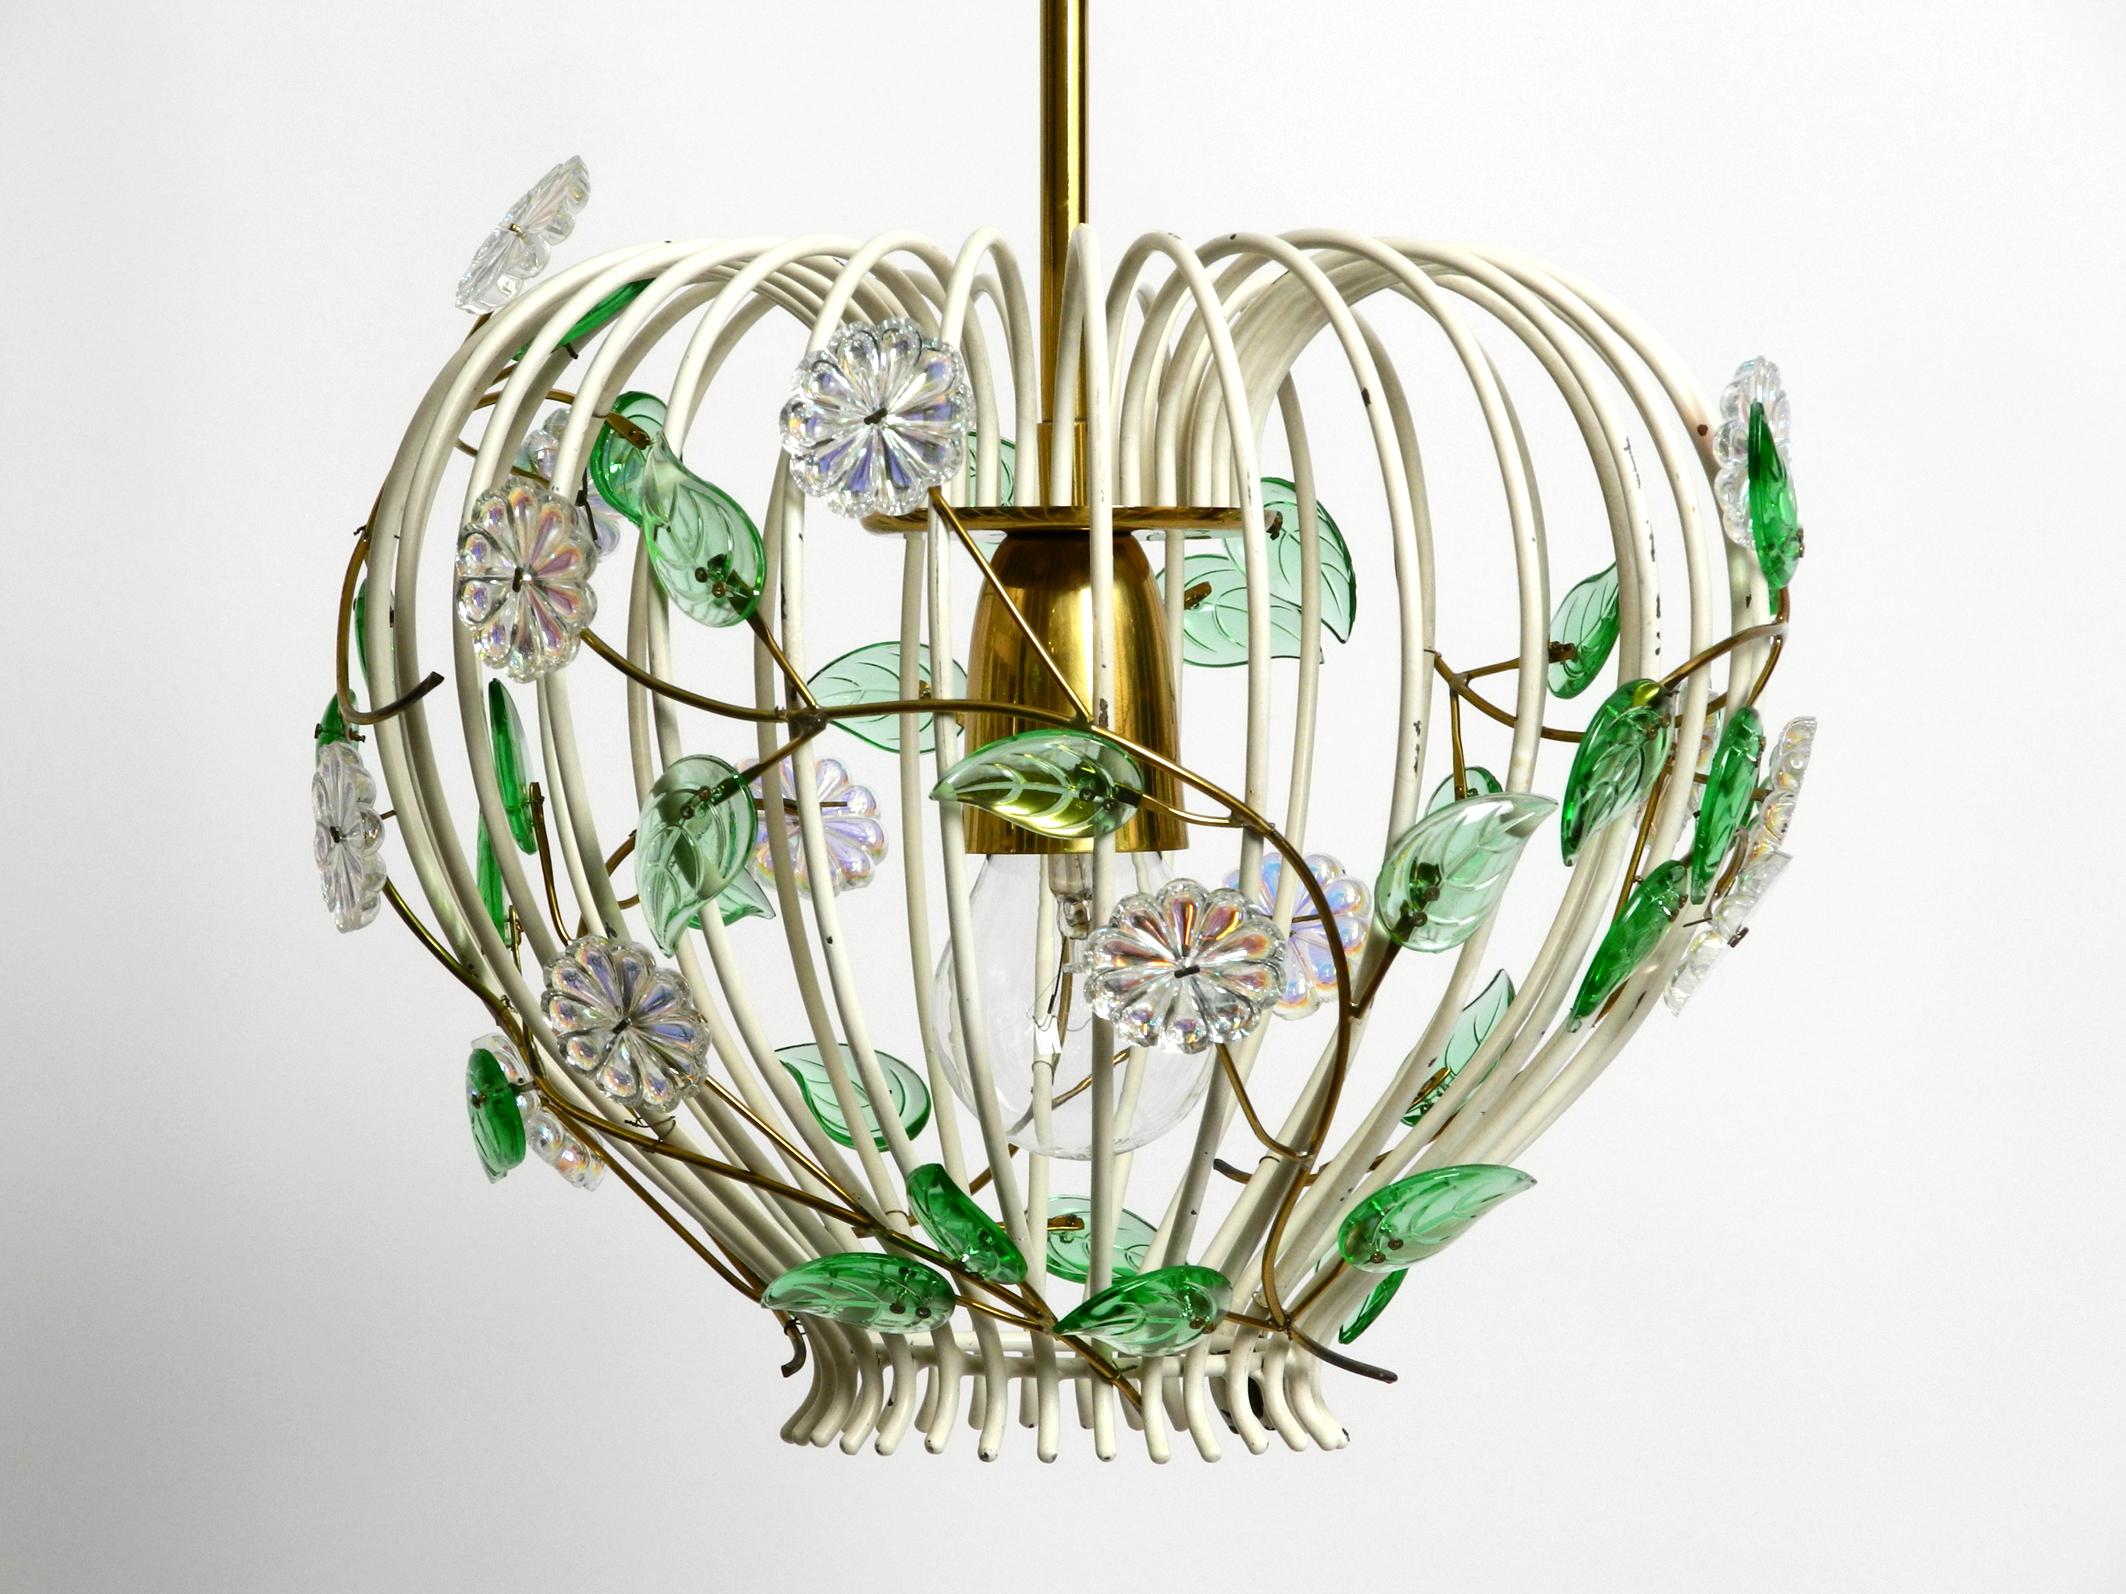 Extraordinary mid century pendant lamp with metal grid and glass stones by Vereinigten Werkstätten.
Metal frame with green and transparent stones on brass branches. Great classy 1950s design.
100% original condition with original paint. All parts